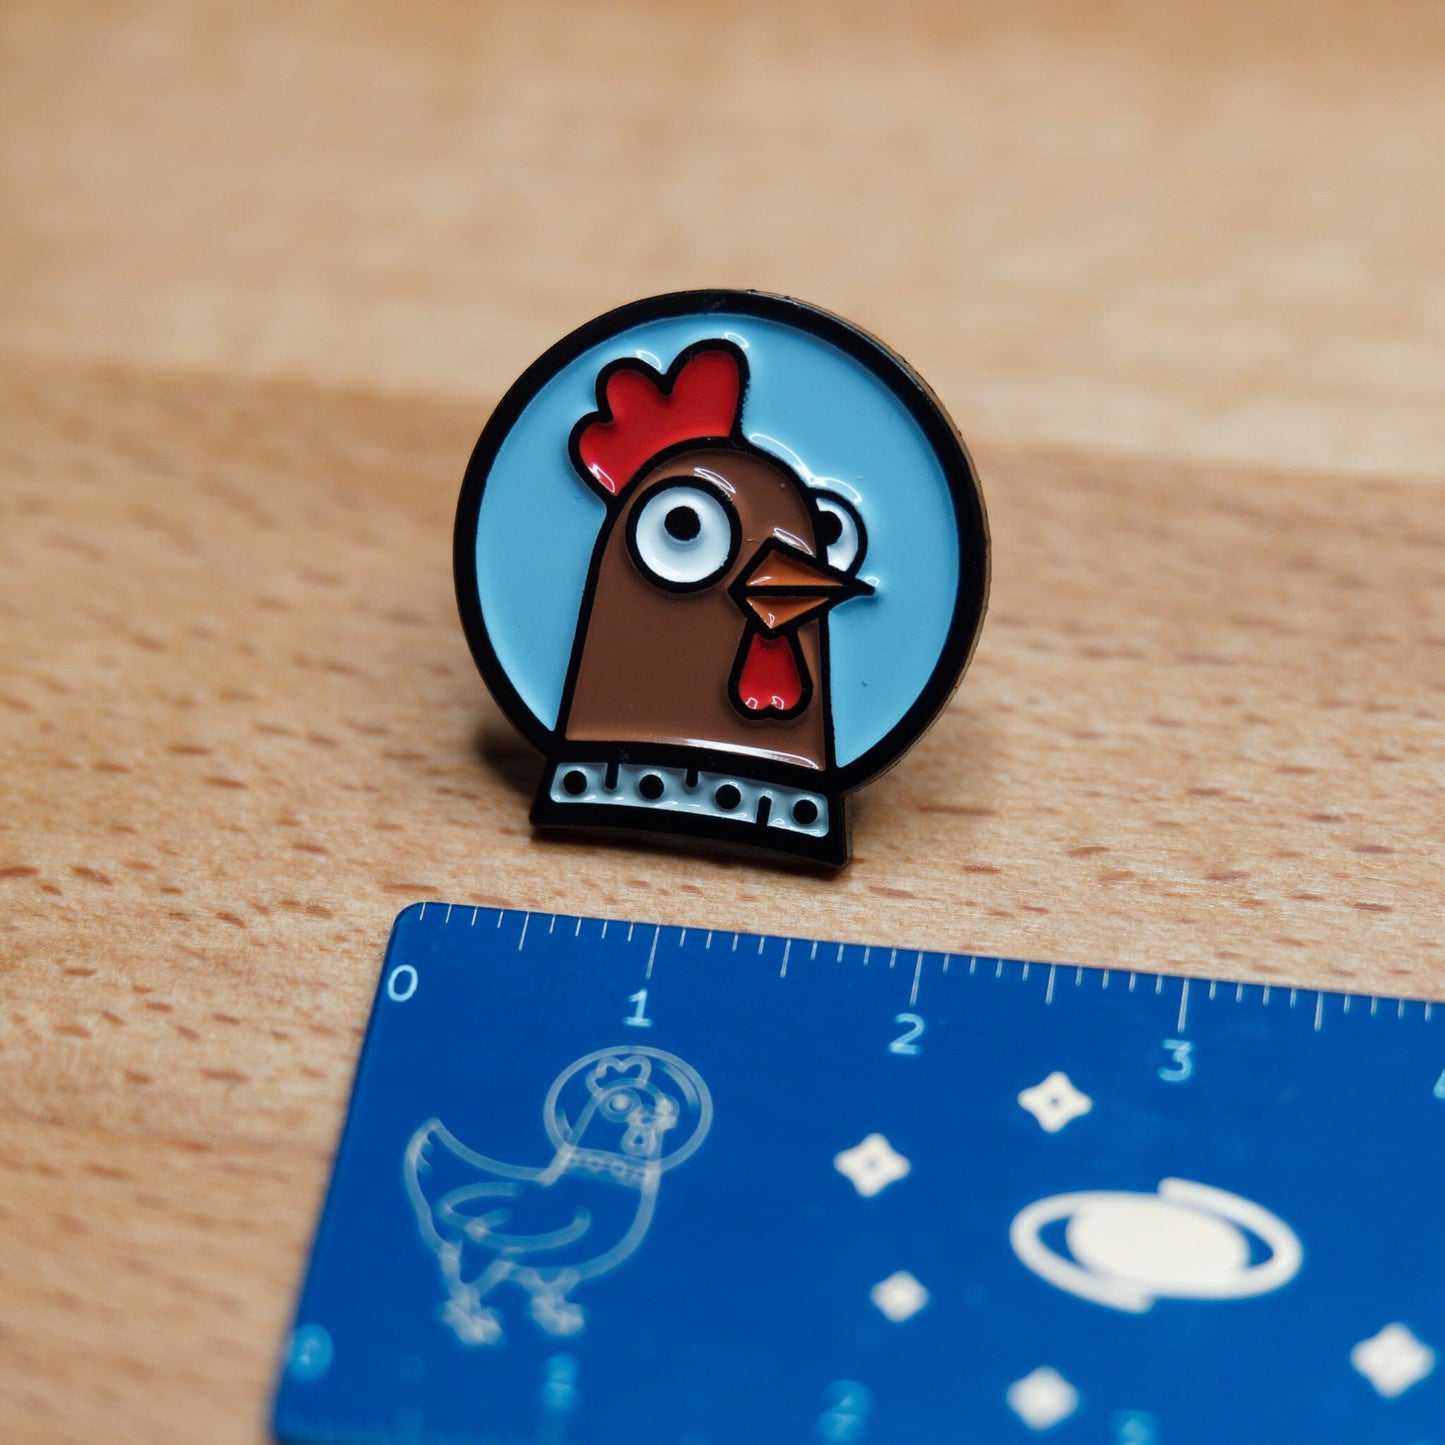 Spacehuhn Enamel Pin with ruler showing it's 22mm wide